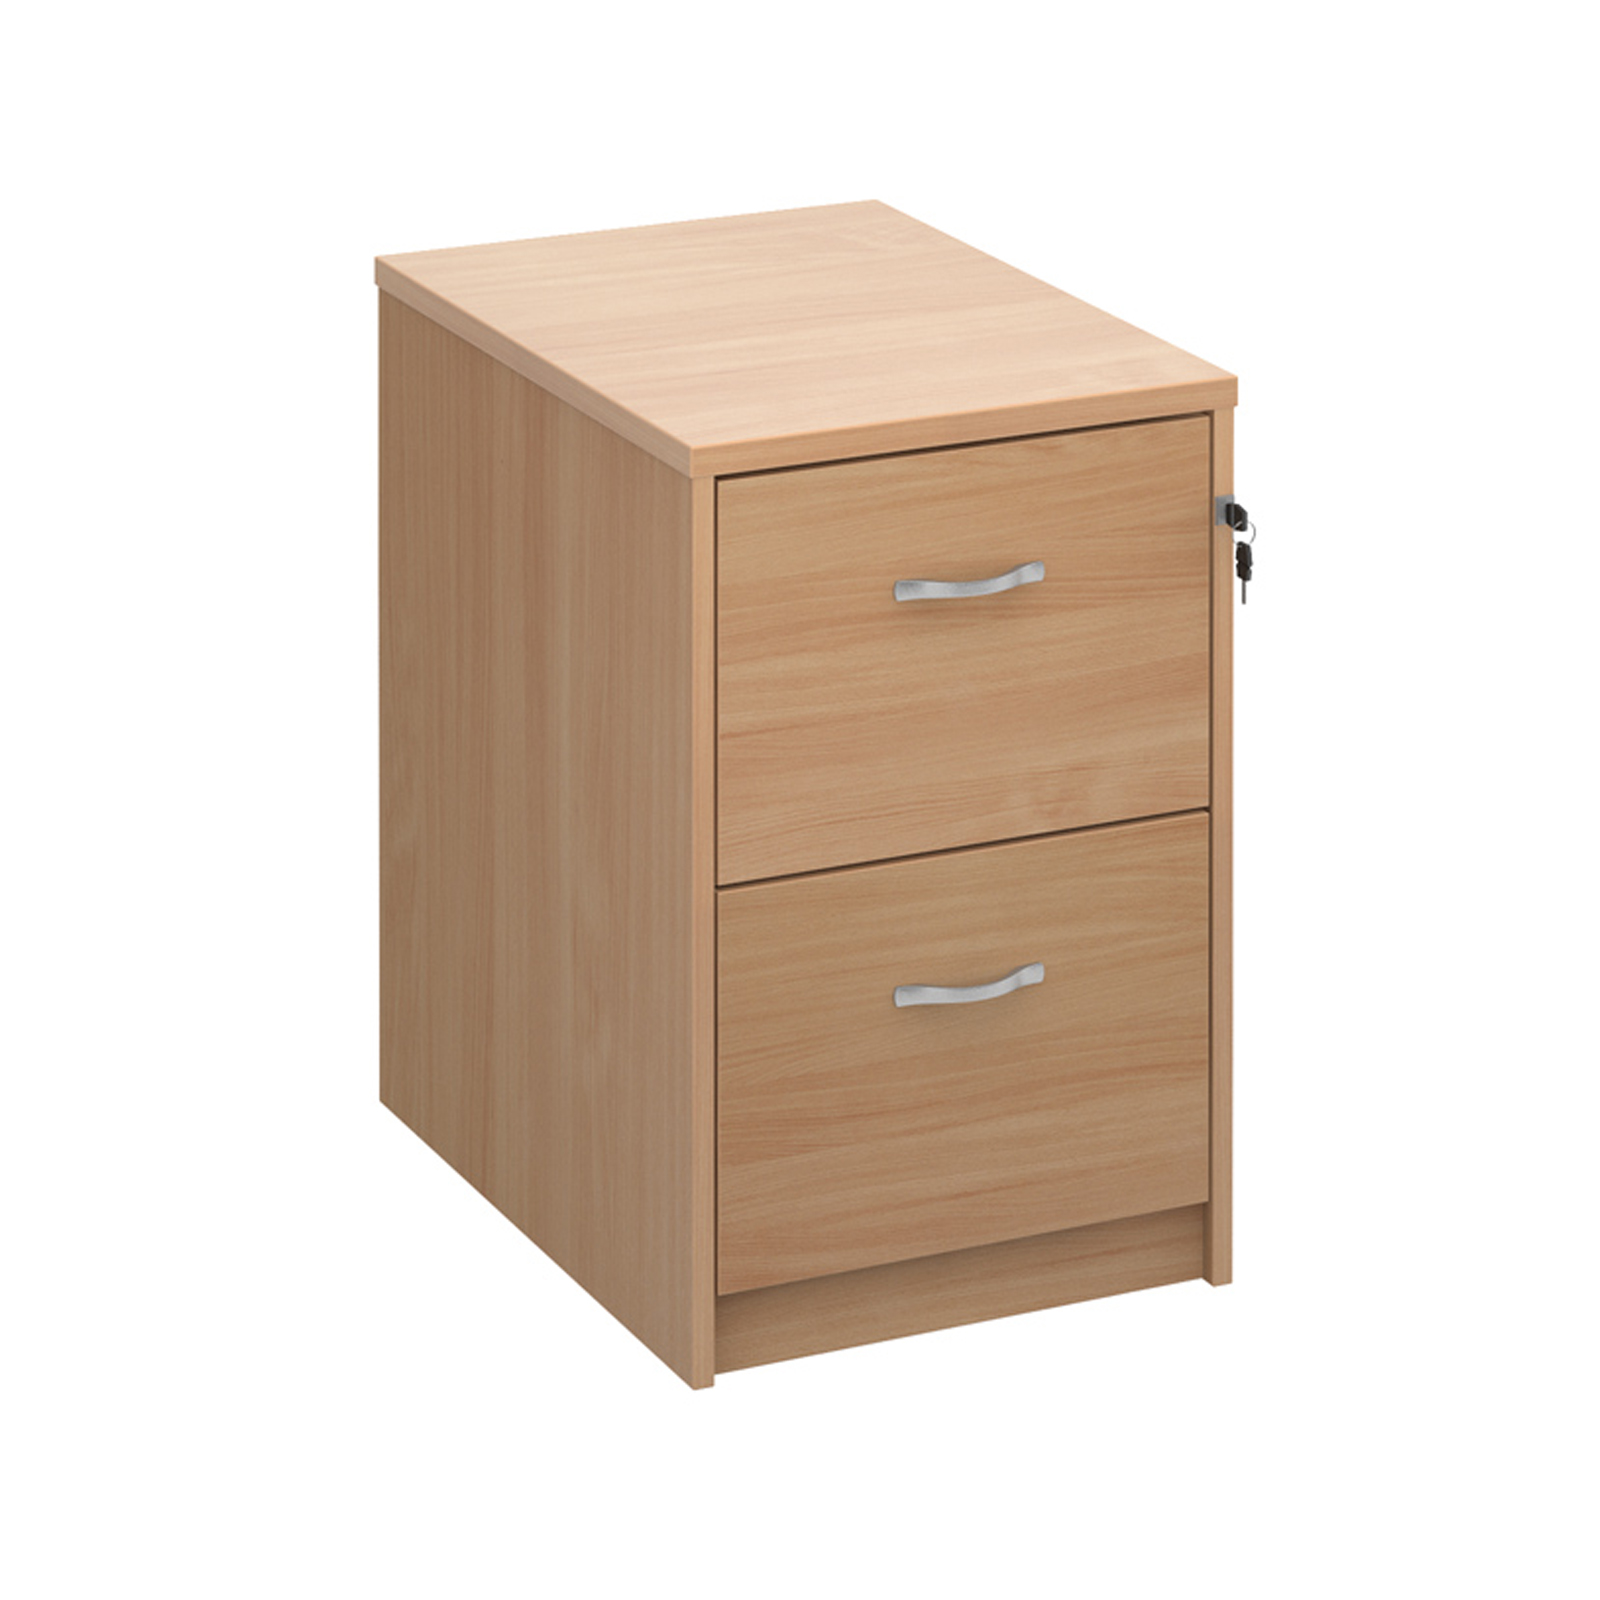 Filing Cabinets Wooden filing cabinet with silver handles